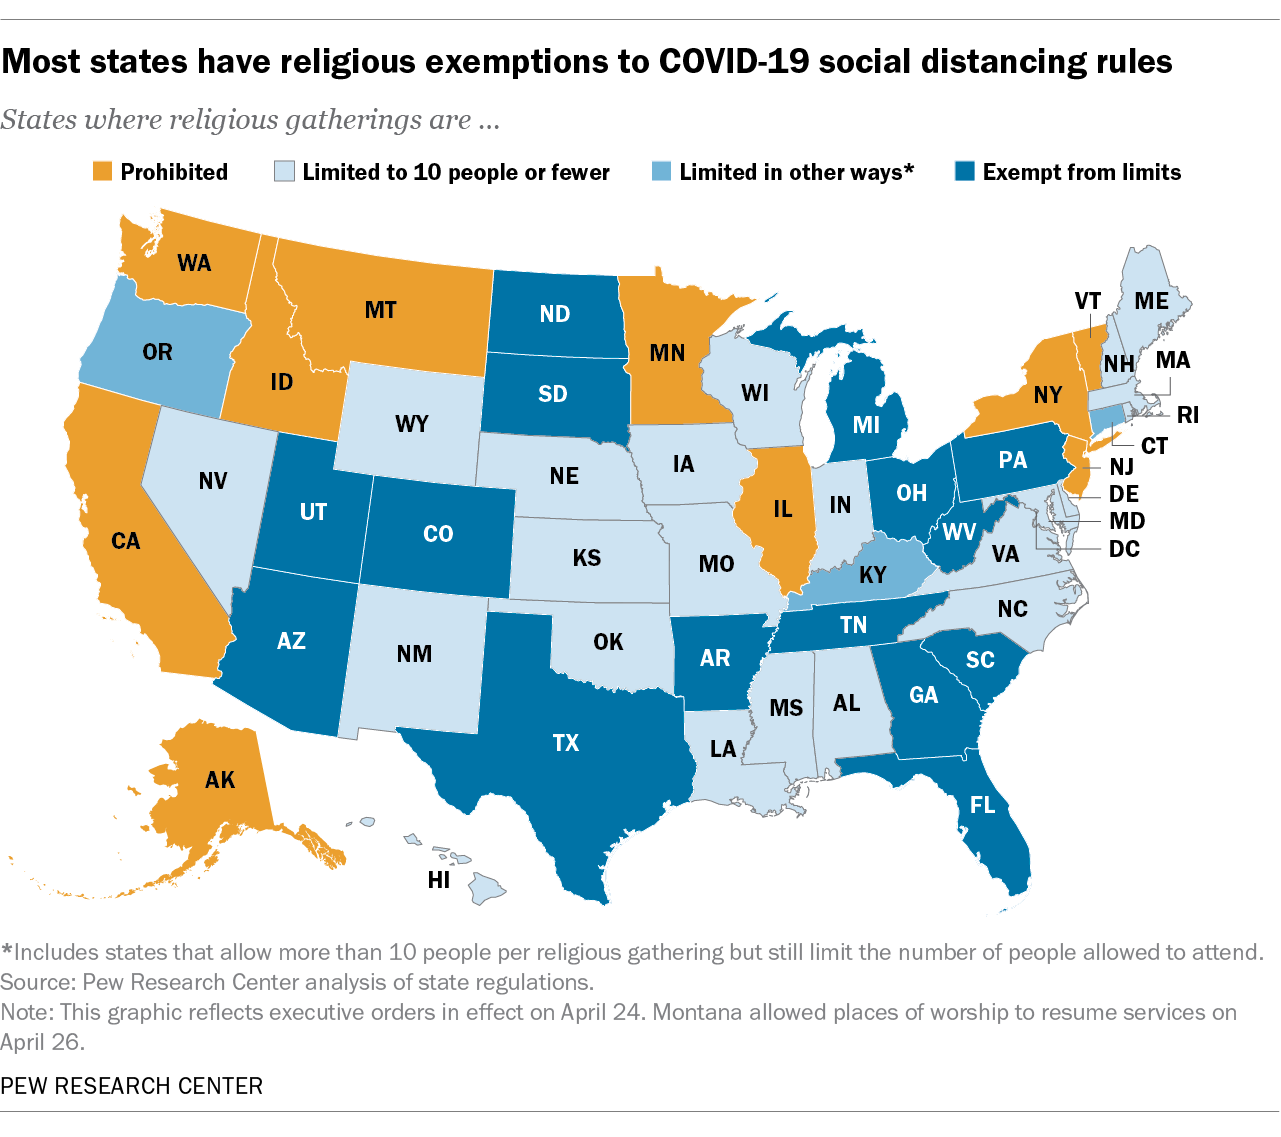 States On Lockdown Map 2021 Most States Have Religious Exemptions To Covid-19 Social Distancing Rules |  Pew Research Center